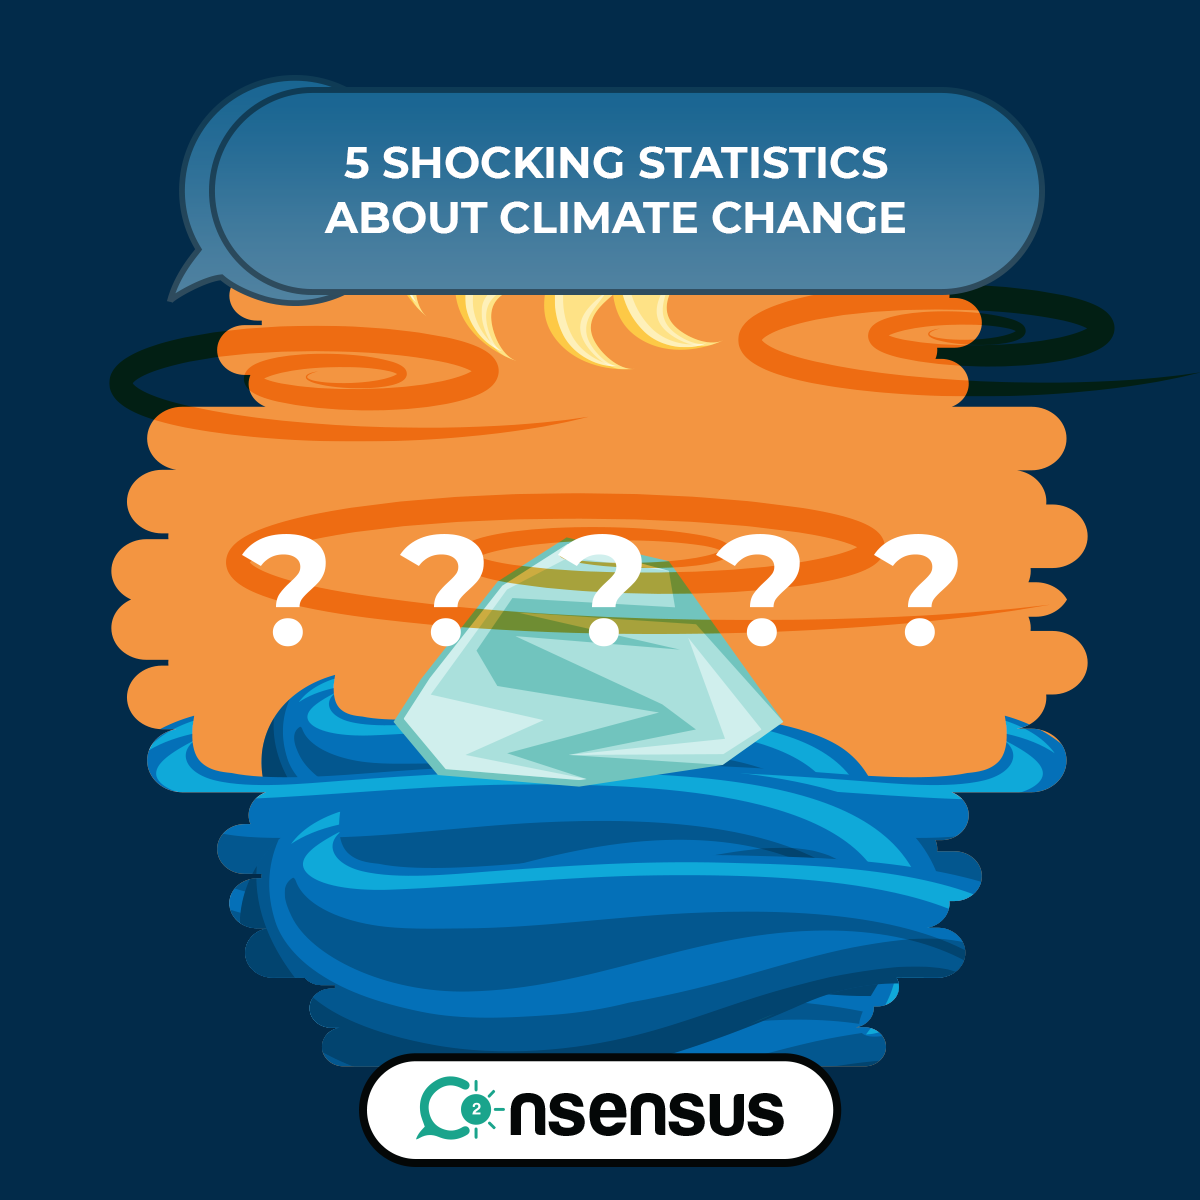 5 Shocking Statistics About Climate Change Co2nsensus